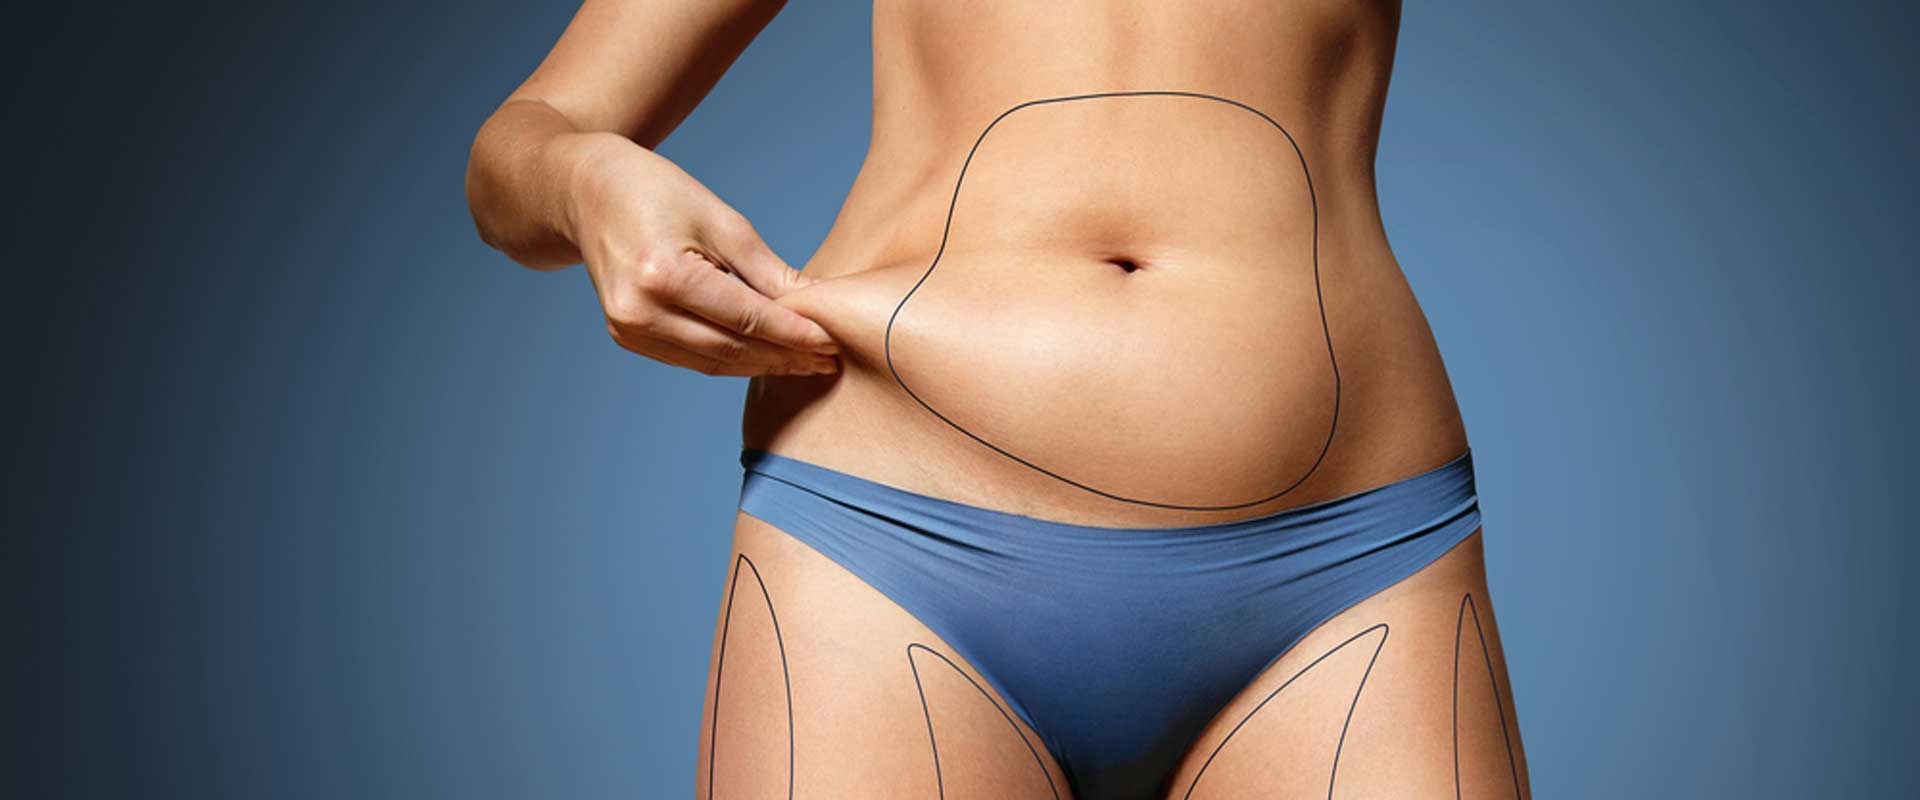 The Pros and Cons of Non-Invasive Fat Reduction